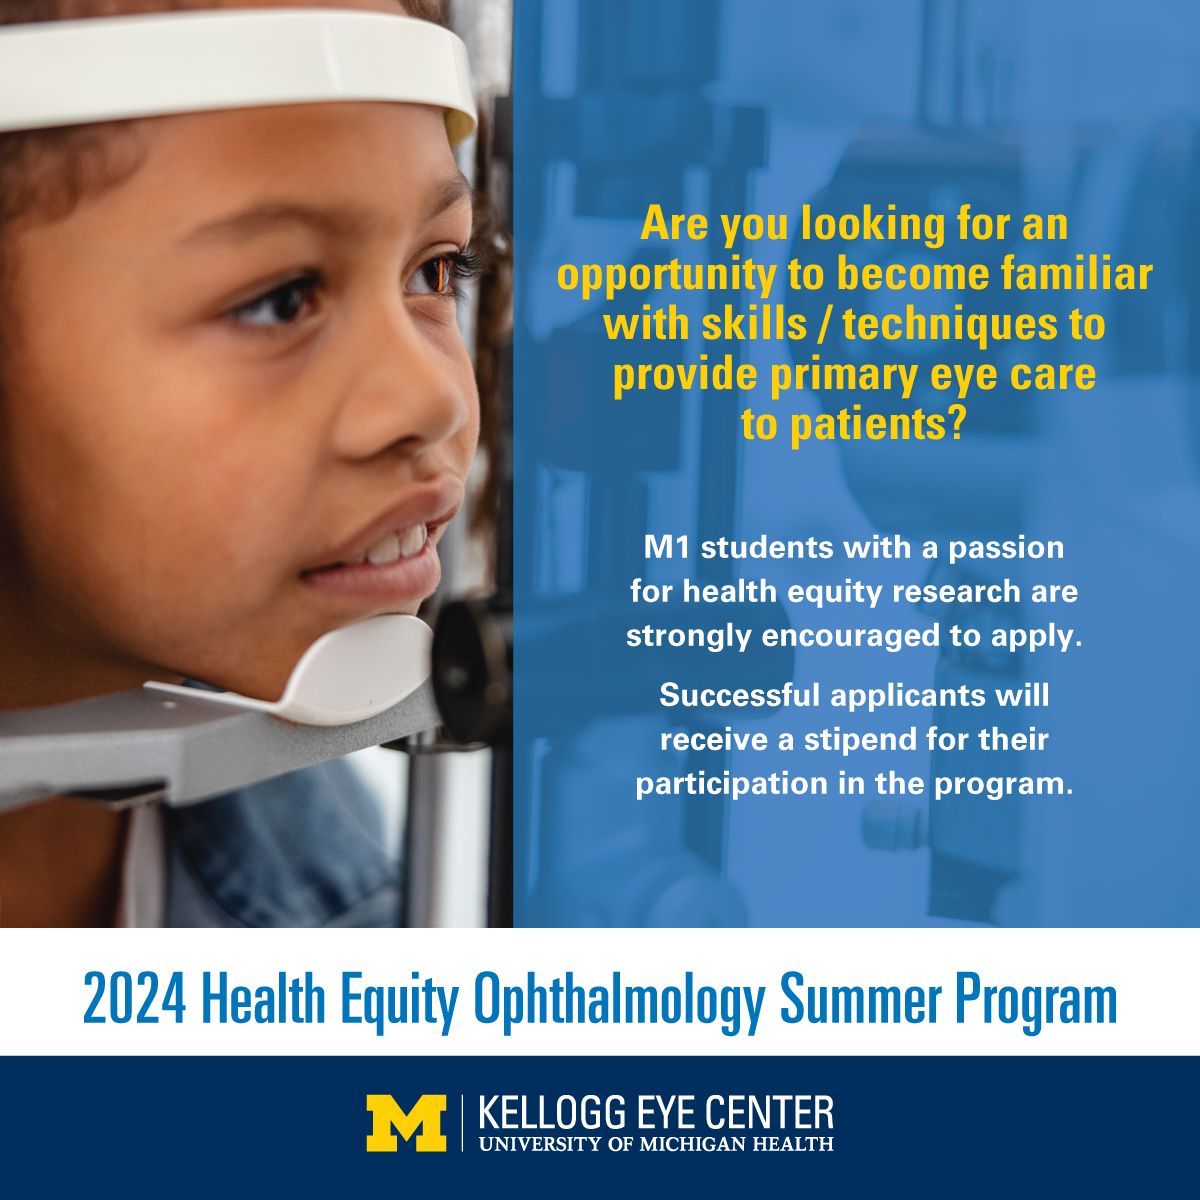 🚨 Only 10 days left to apply! Level up your ophthalmology skills and contribute to health equity with our Health Equity Ophthalmology Summer Program. Apply now: michmed.org/7NDr4 #HealthEquity #OphthalmologyProgram #MedicalStudents #DeadlineAlert